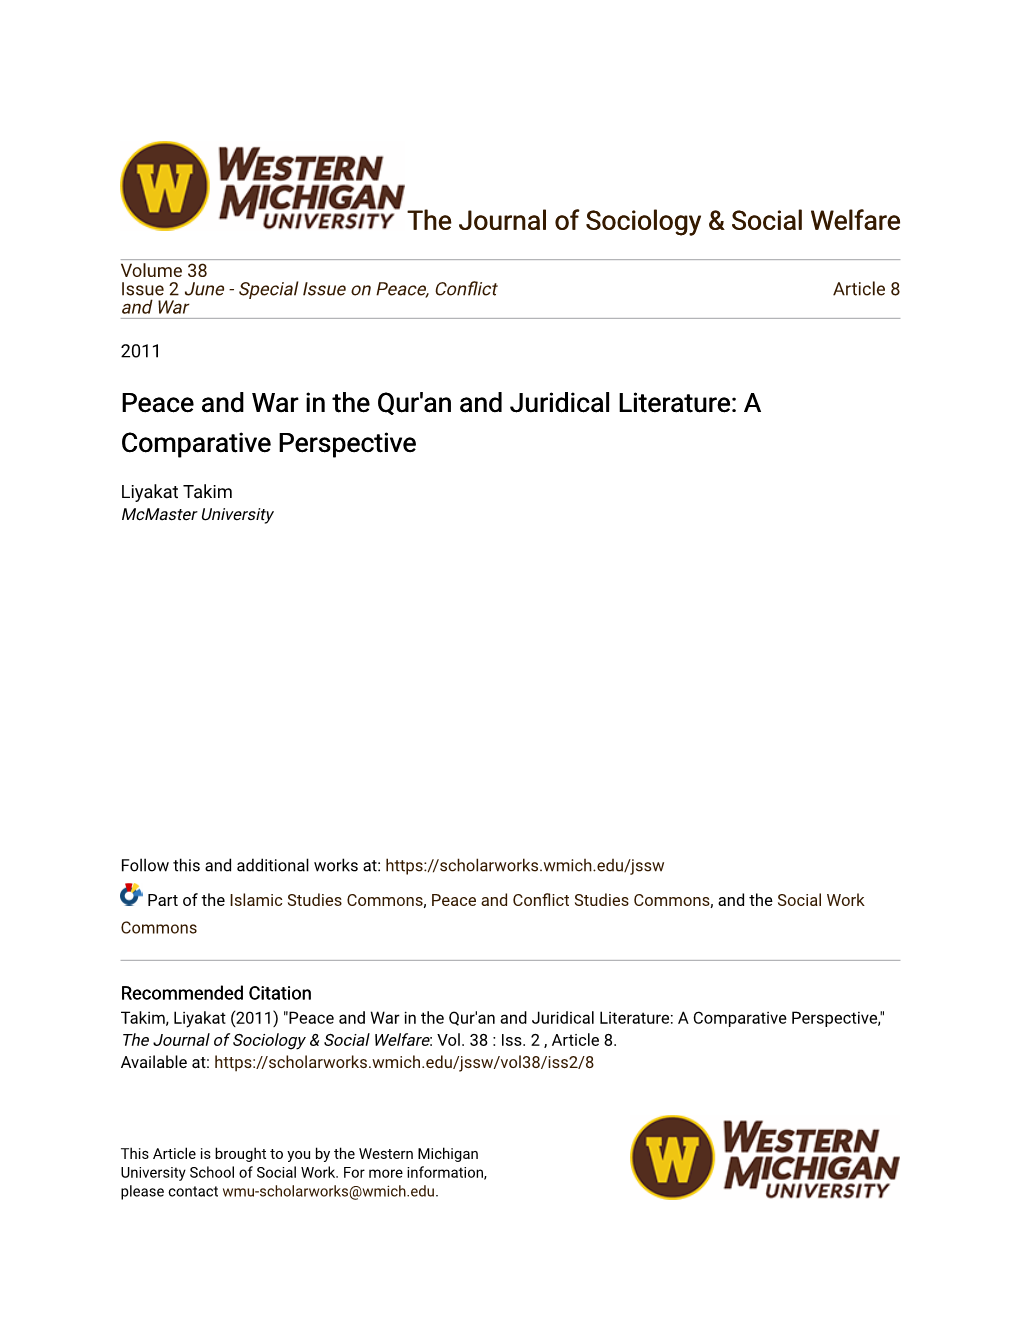 Peace and War in the Qur'an and Juridical Literature: a Comparative Perspective